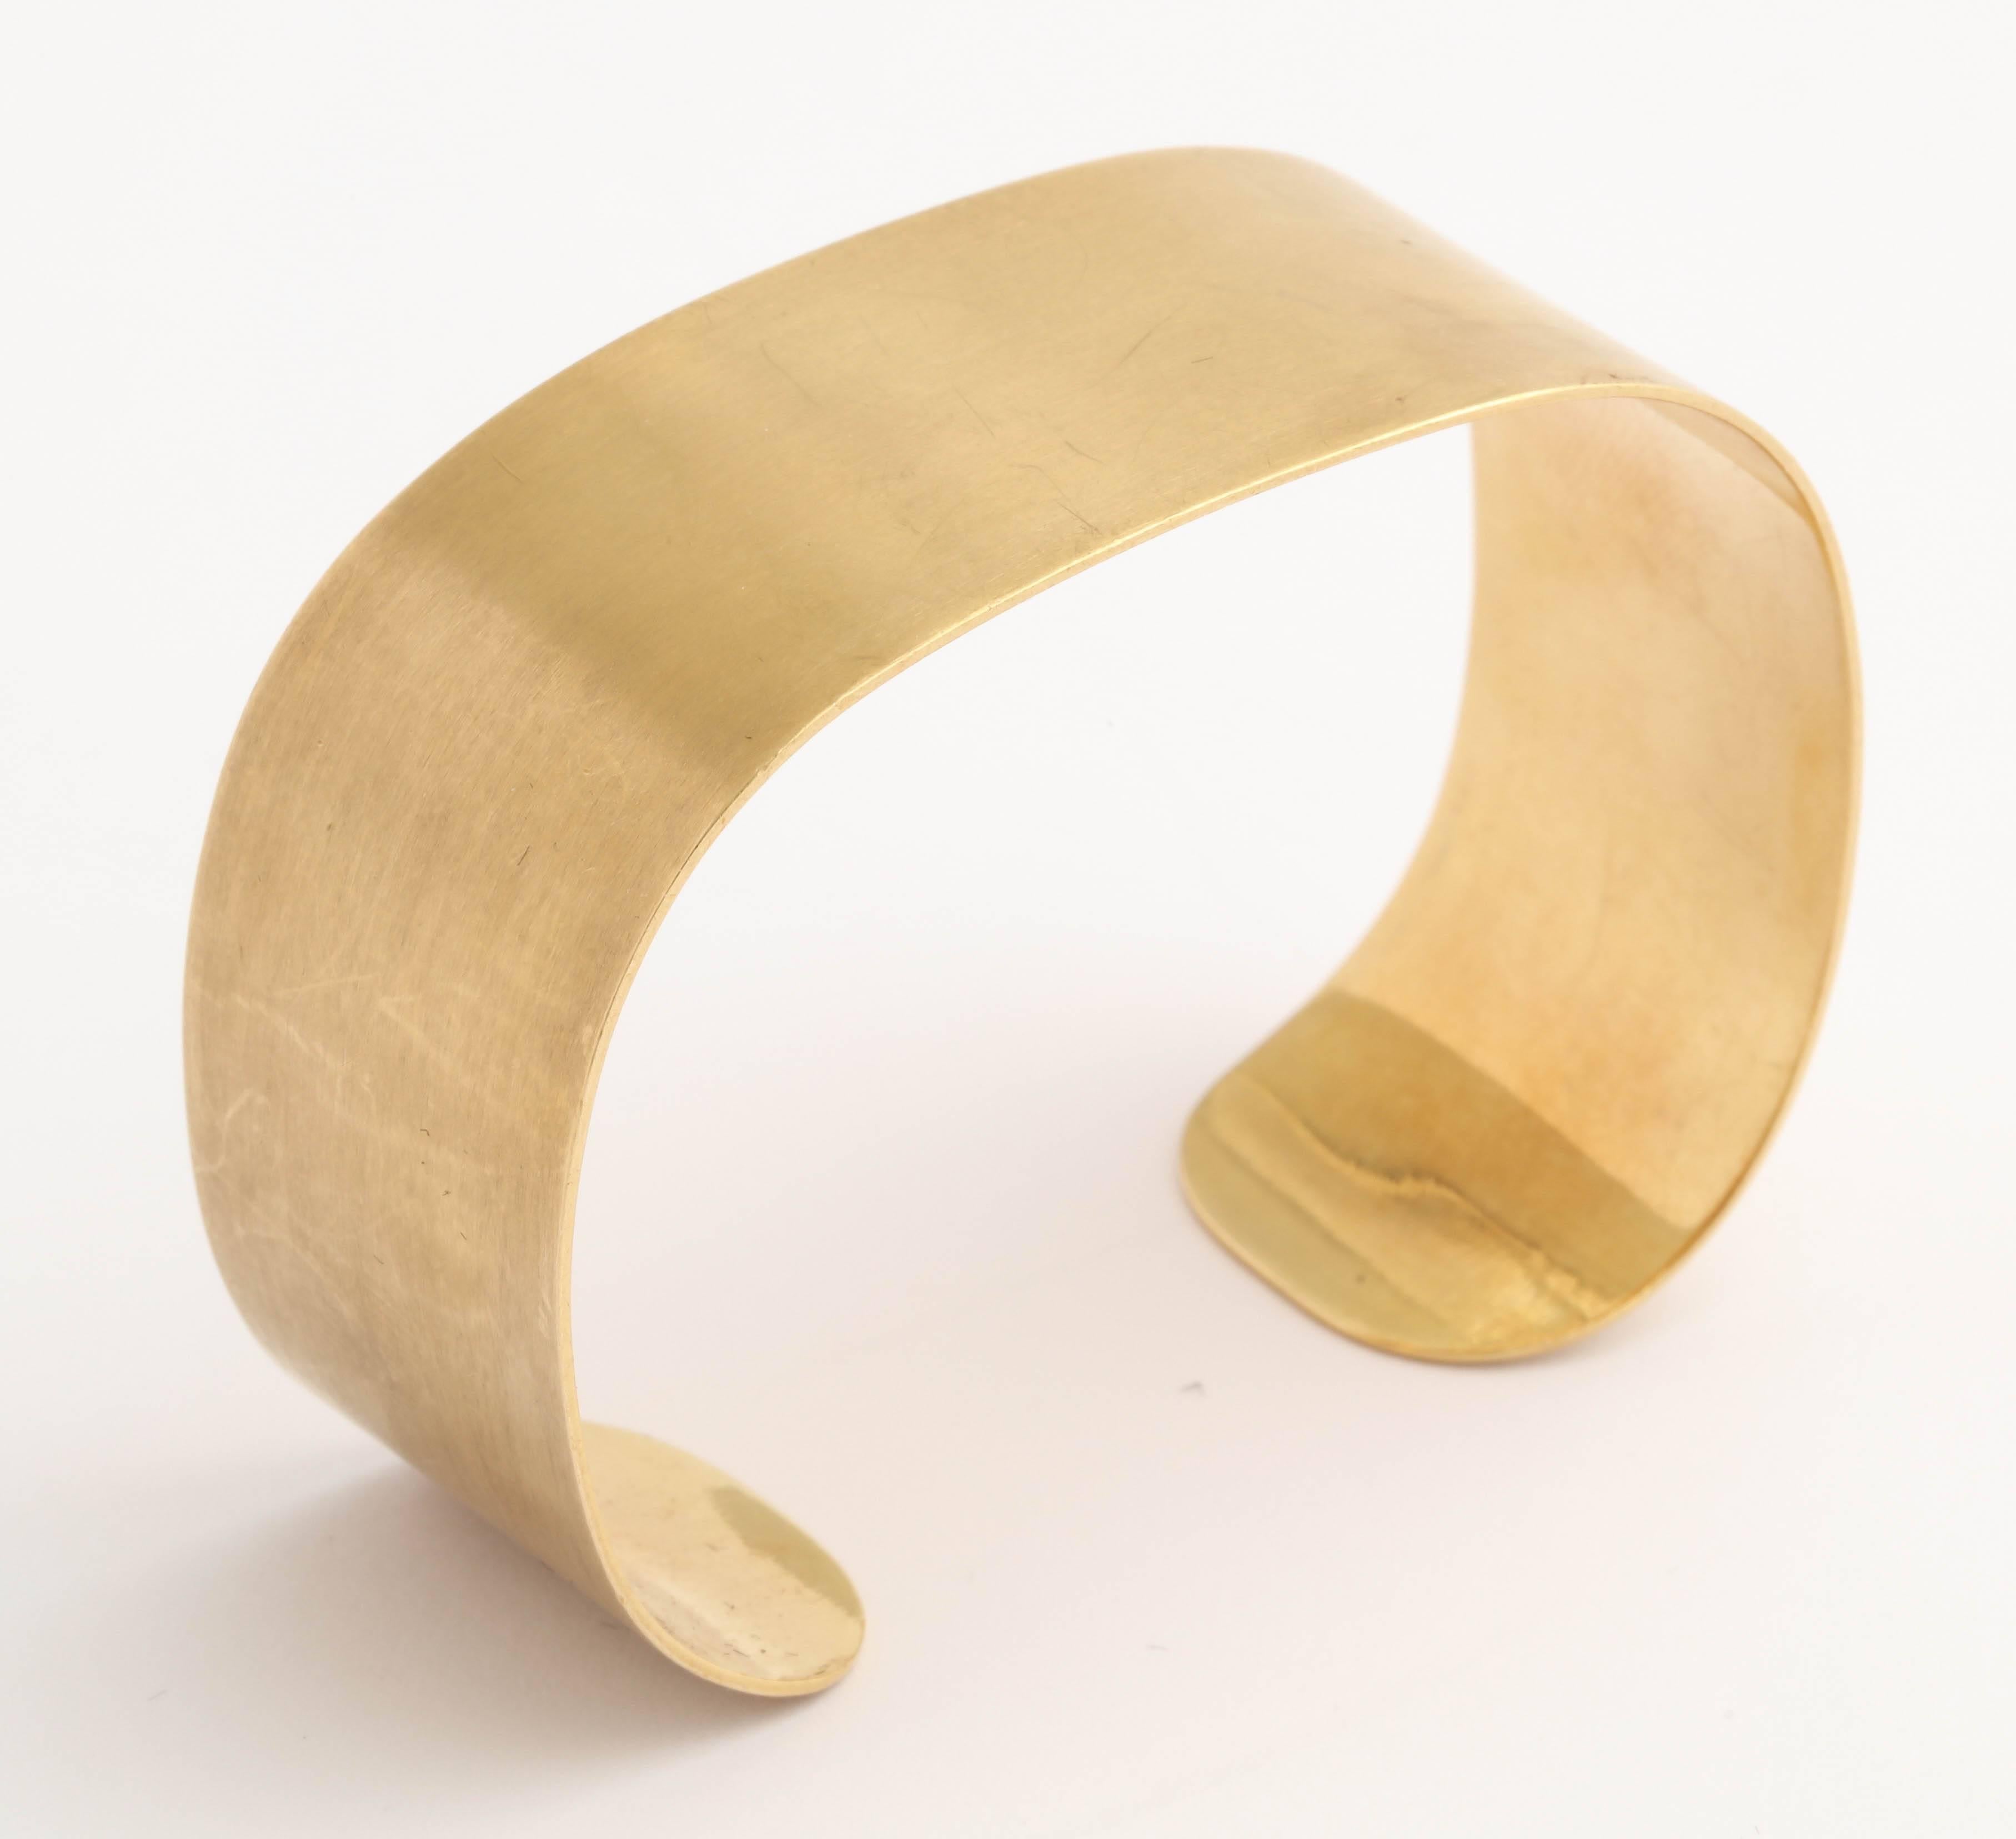 Vintage Dinh Van C shaped cuff Bracelet made for Cartier around 1960-1965 with a brushed satin finish.  Signed Cartier 18Kt  on one end and C -  Dinh Van on the other end. Inner measurement 2 1/4" x 11 3/4"  So cool.